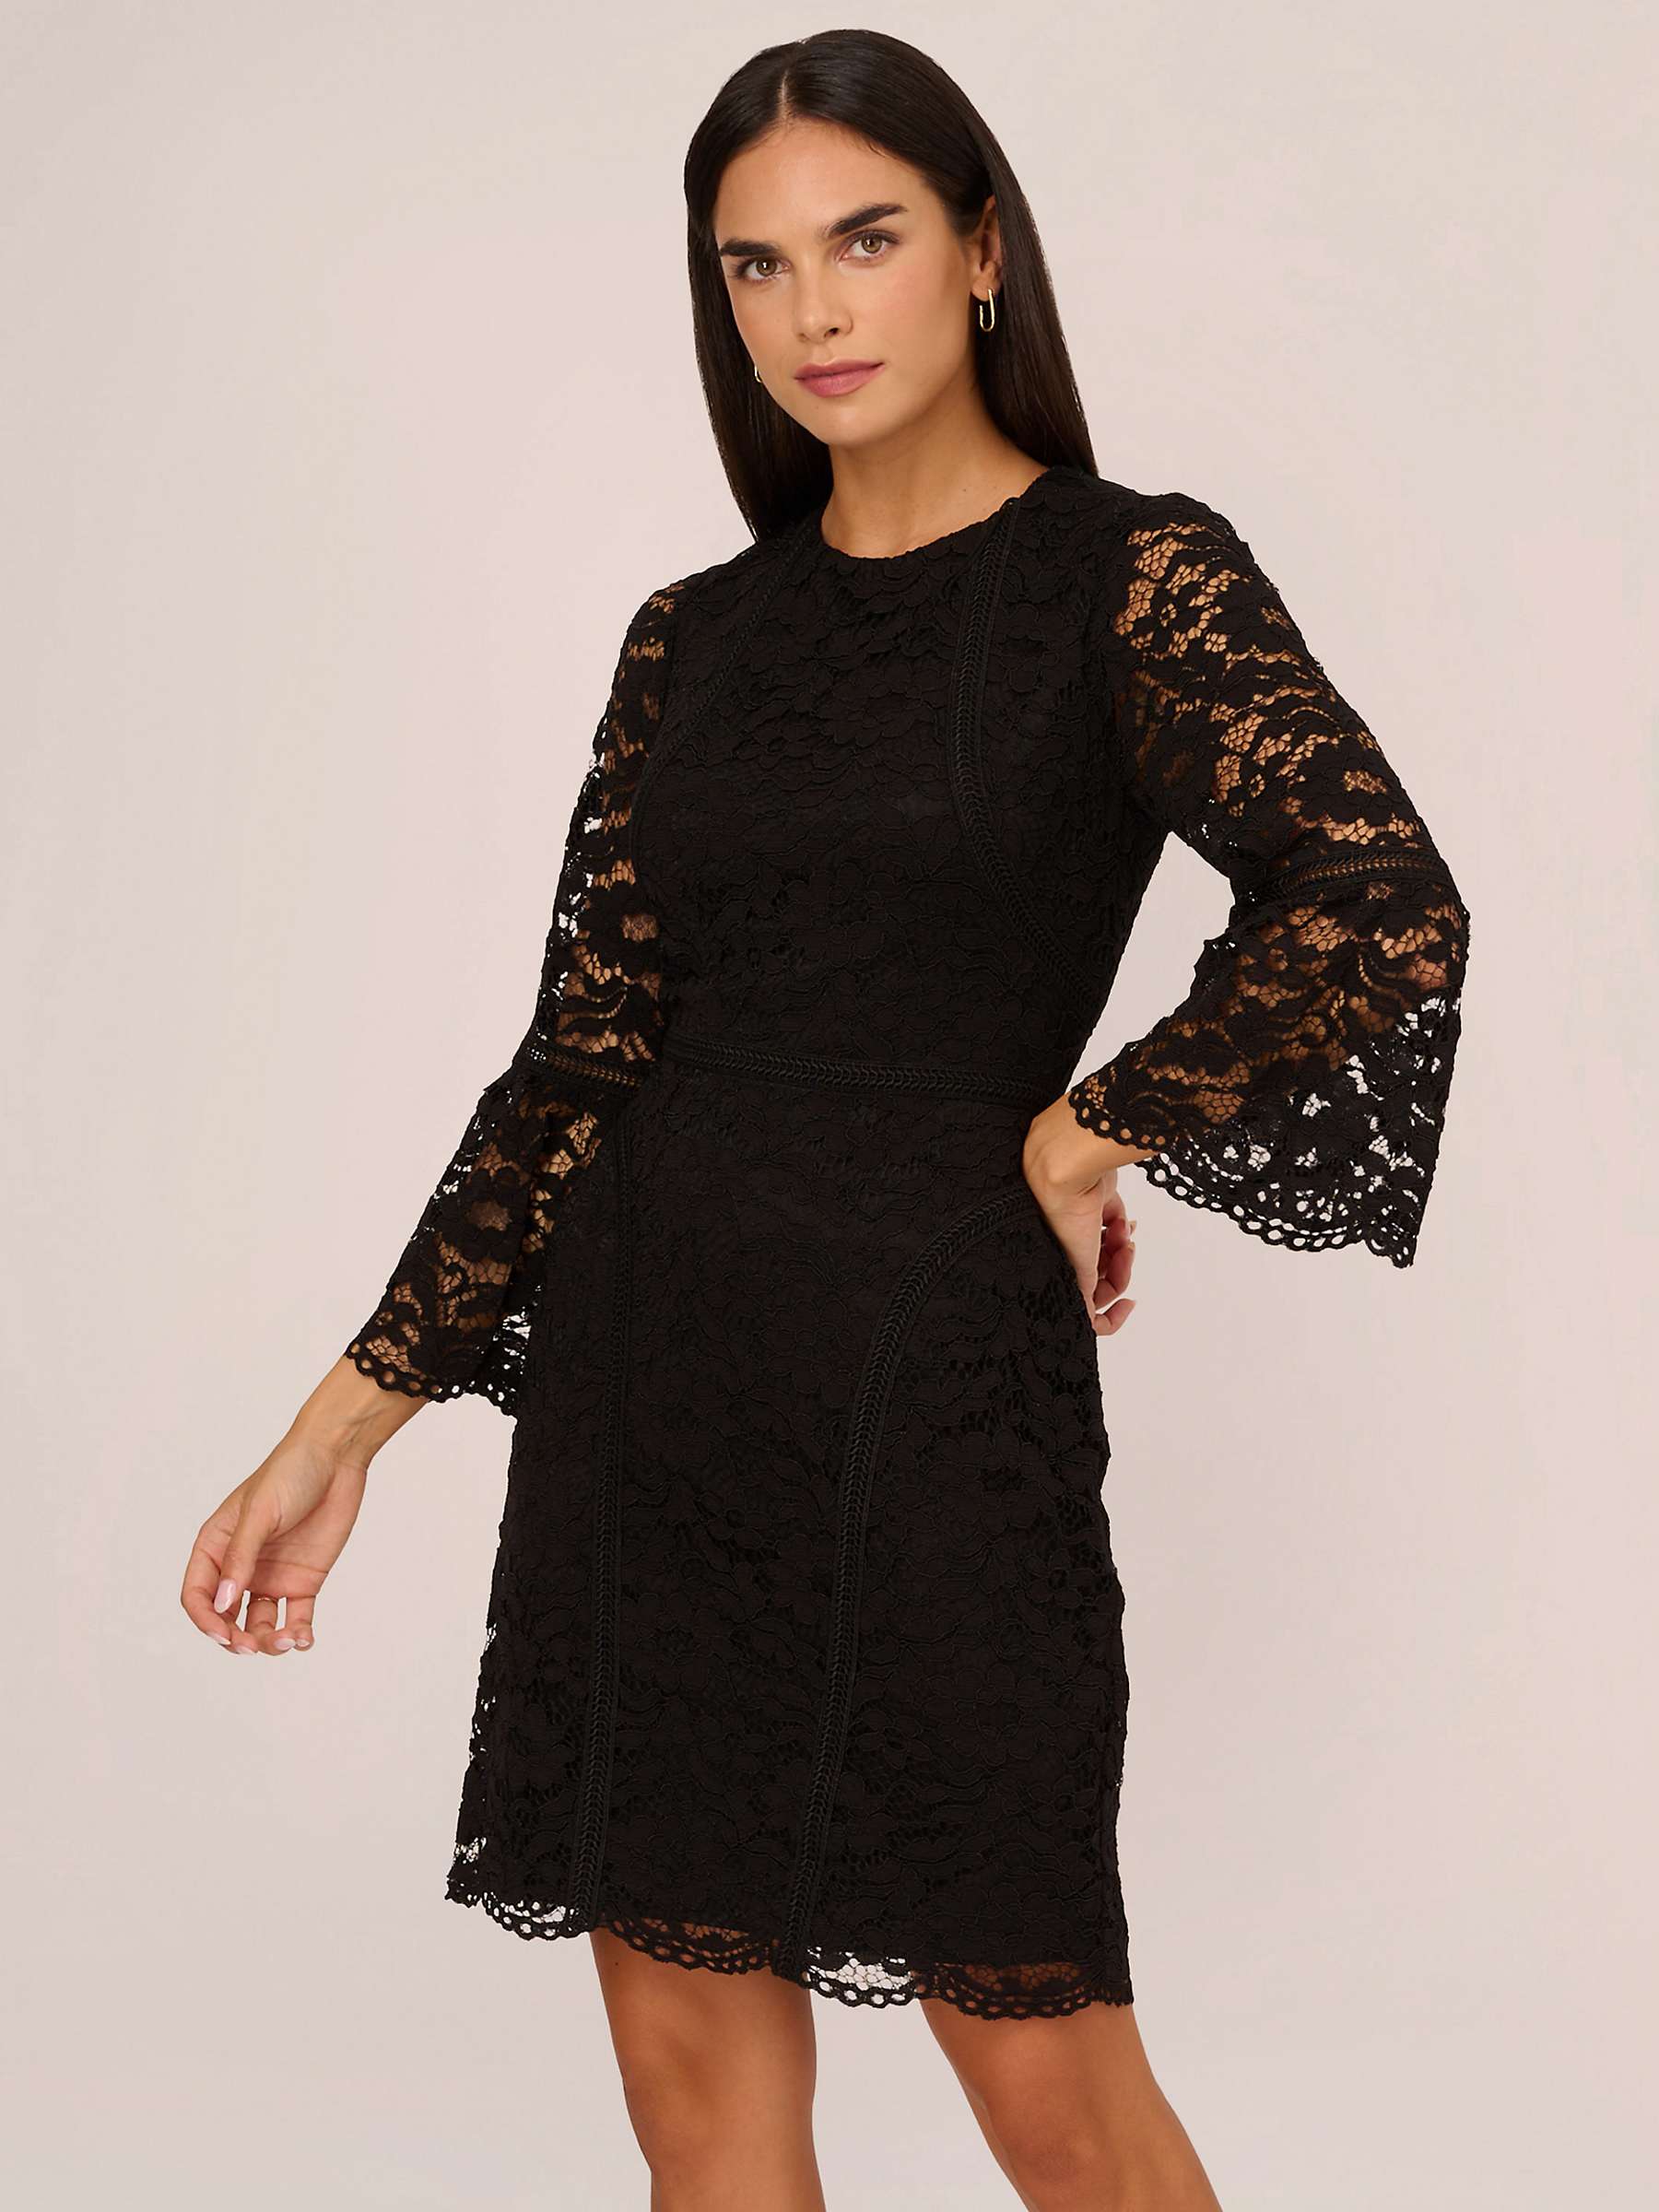 Buy Adrianna Papell Lace Short Dress, Black Online at johnlewis.com